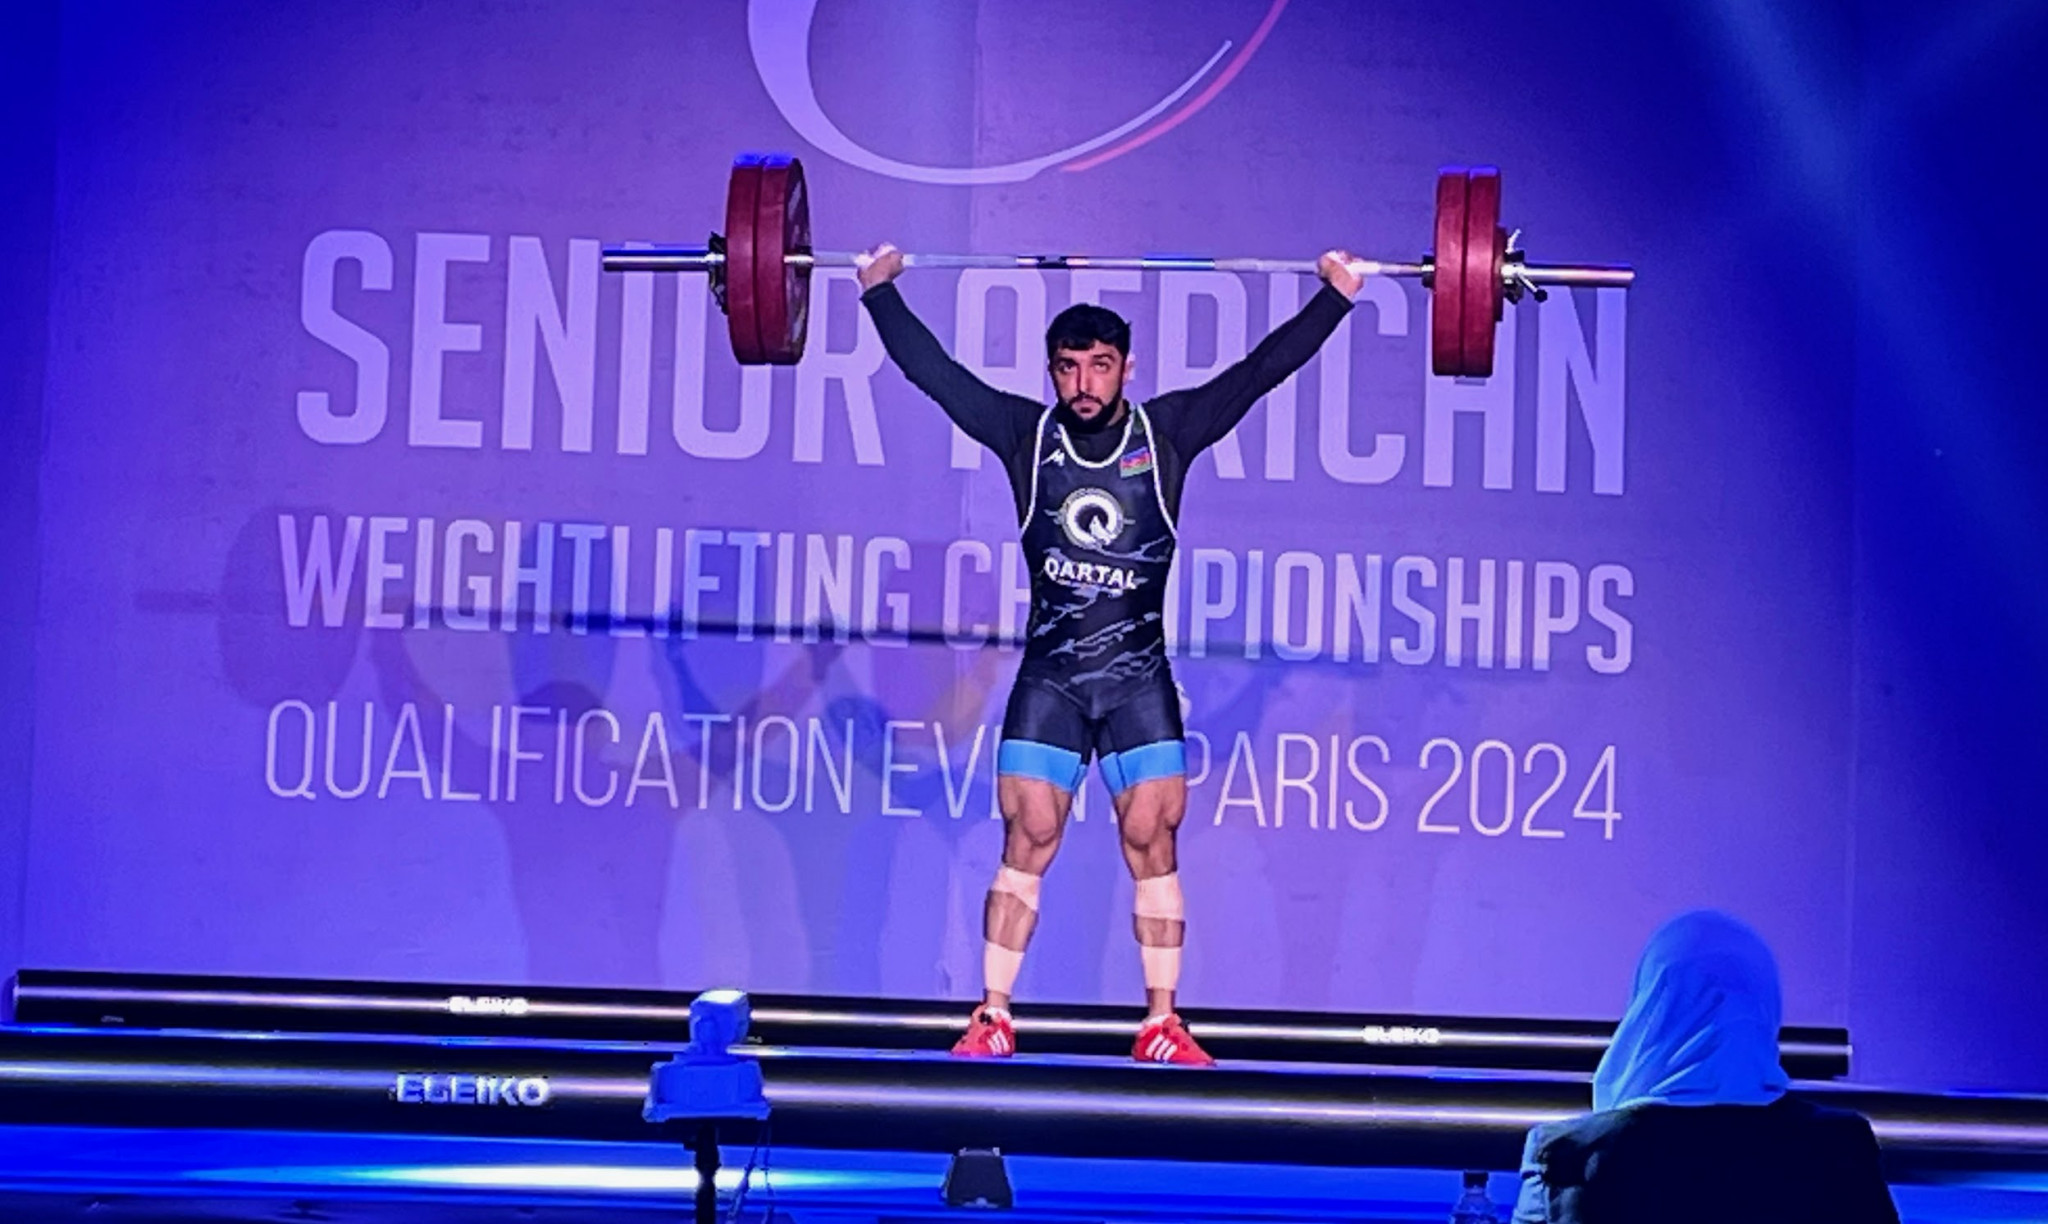 Azerbaijan weightlifter claims Continental Championships victory - in Africa